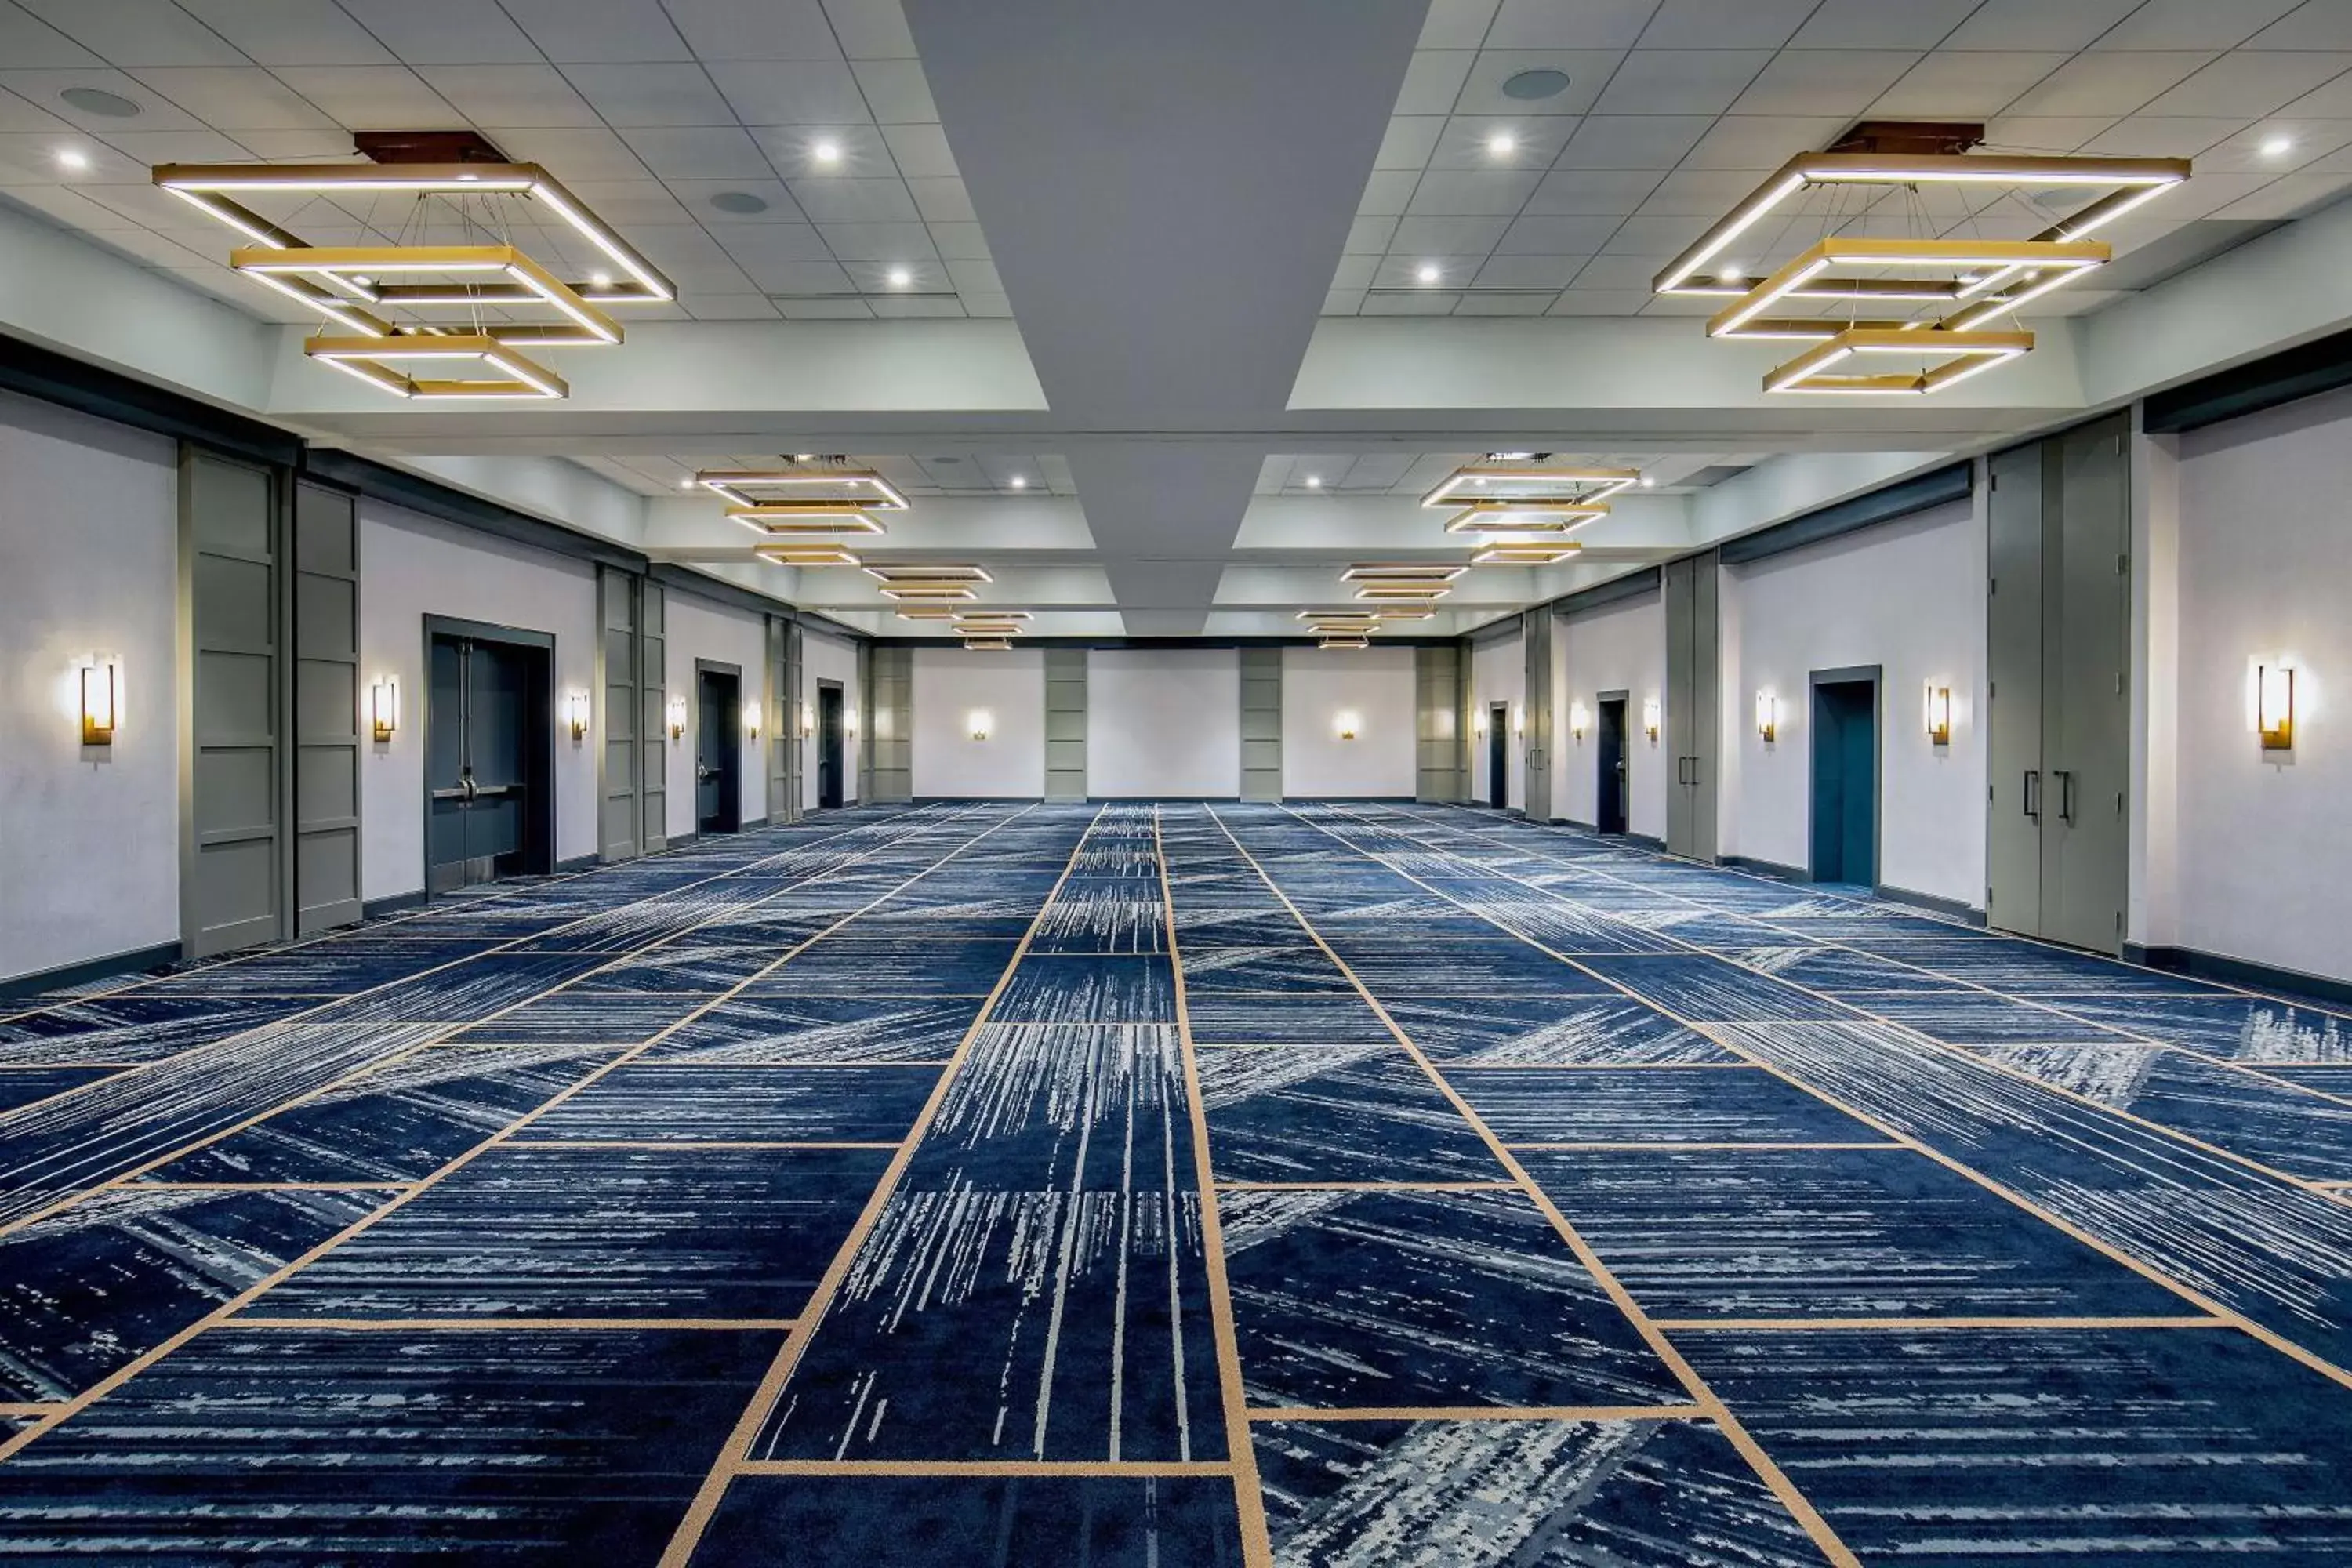 Meeting/conference room, Other Activities in DoubleTree by Hilton Washington DC North/Gaithersburg